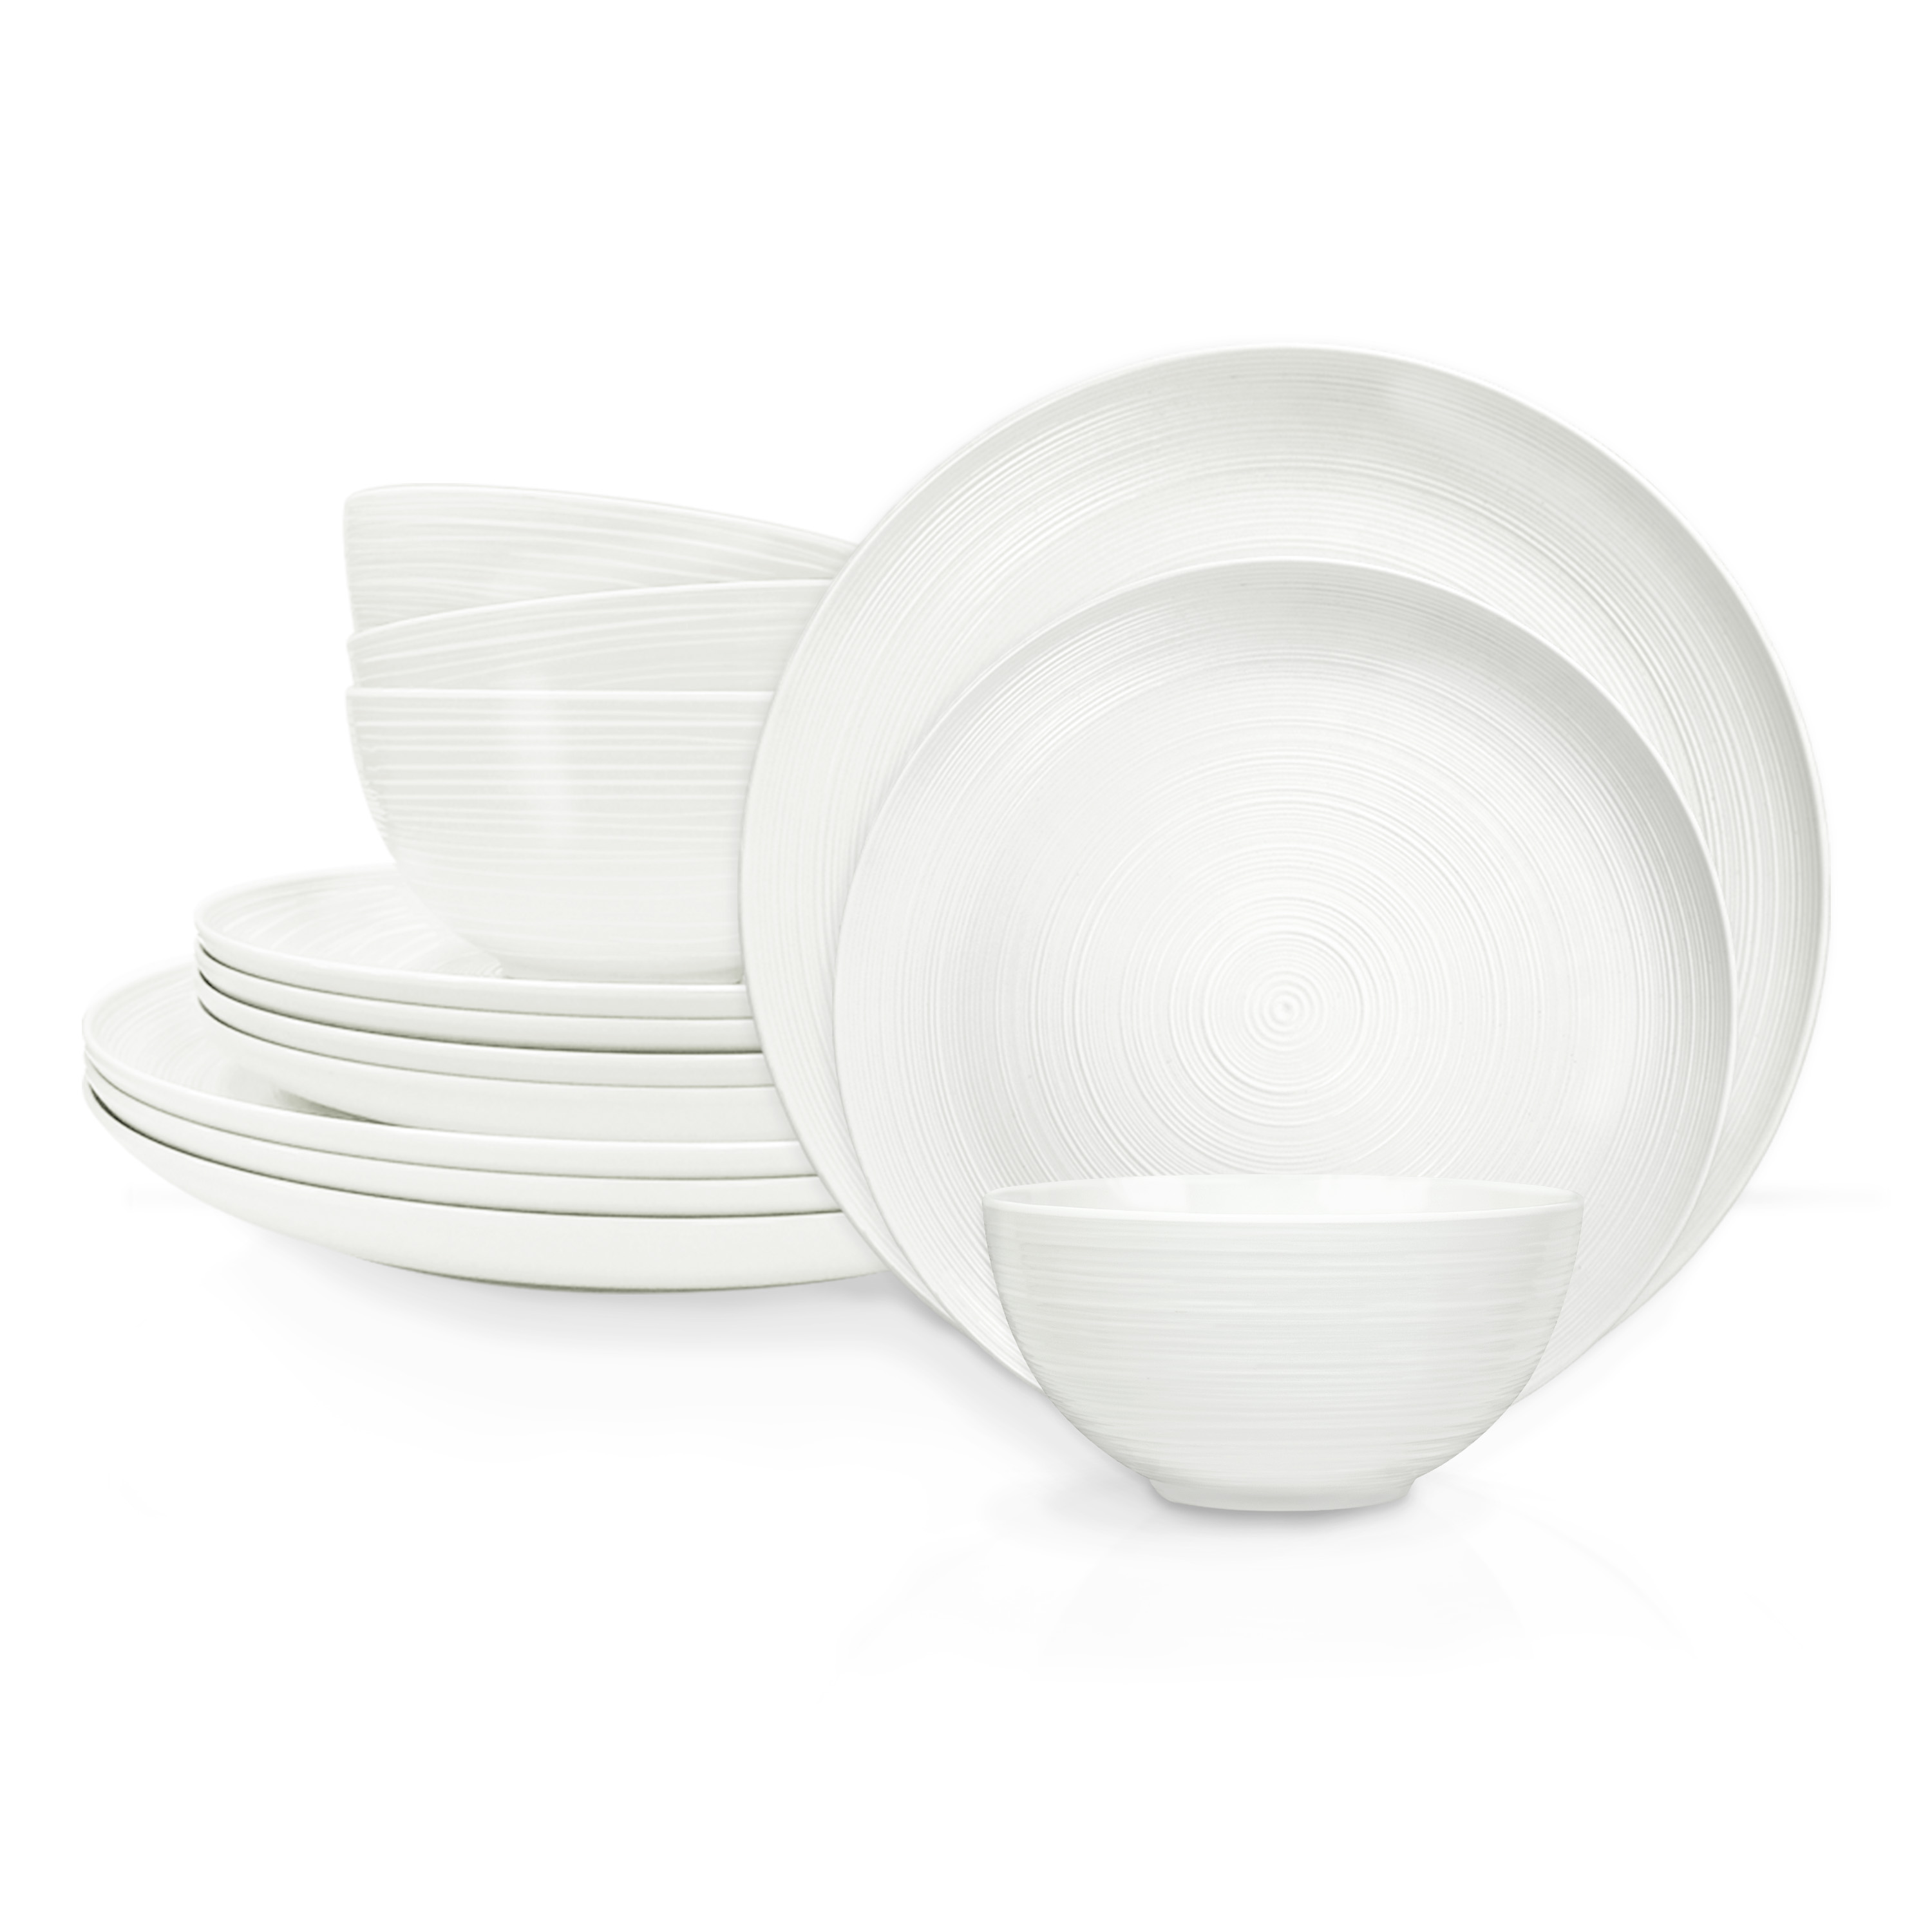 American Conventional Plate & Bowl Sets, White, 12-piece set slideshow image 1